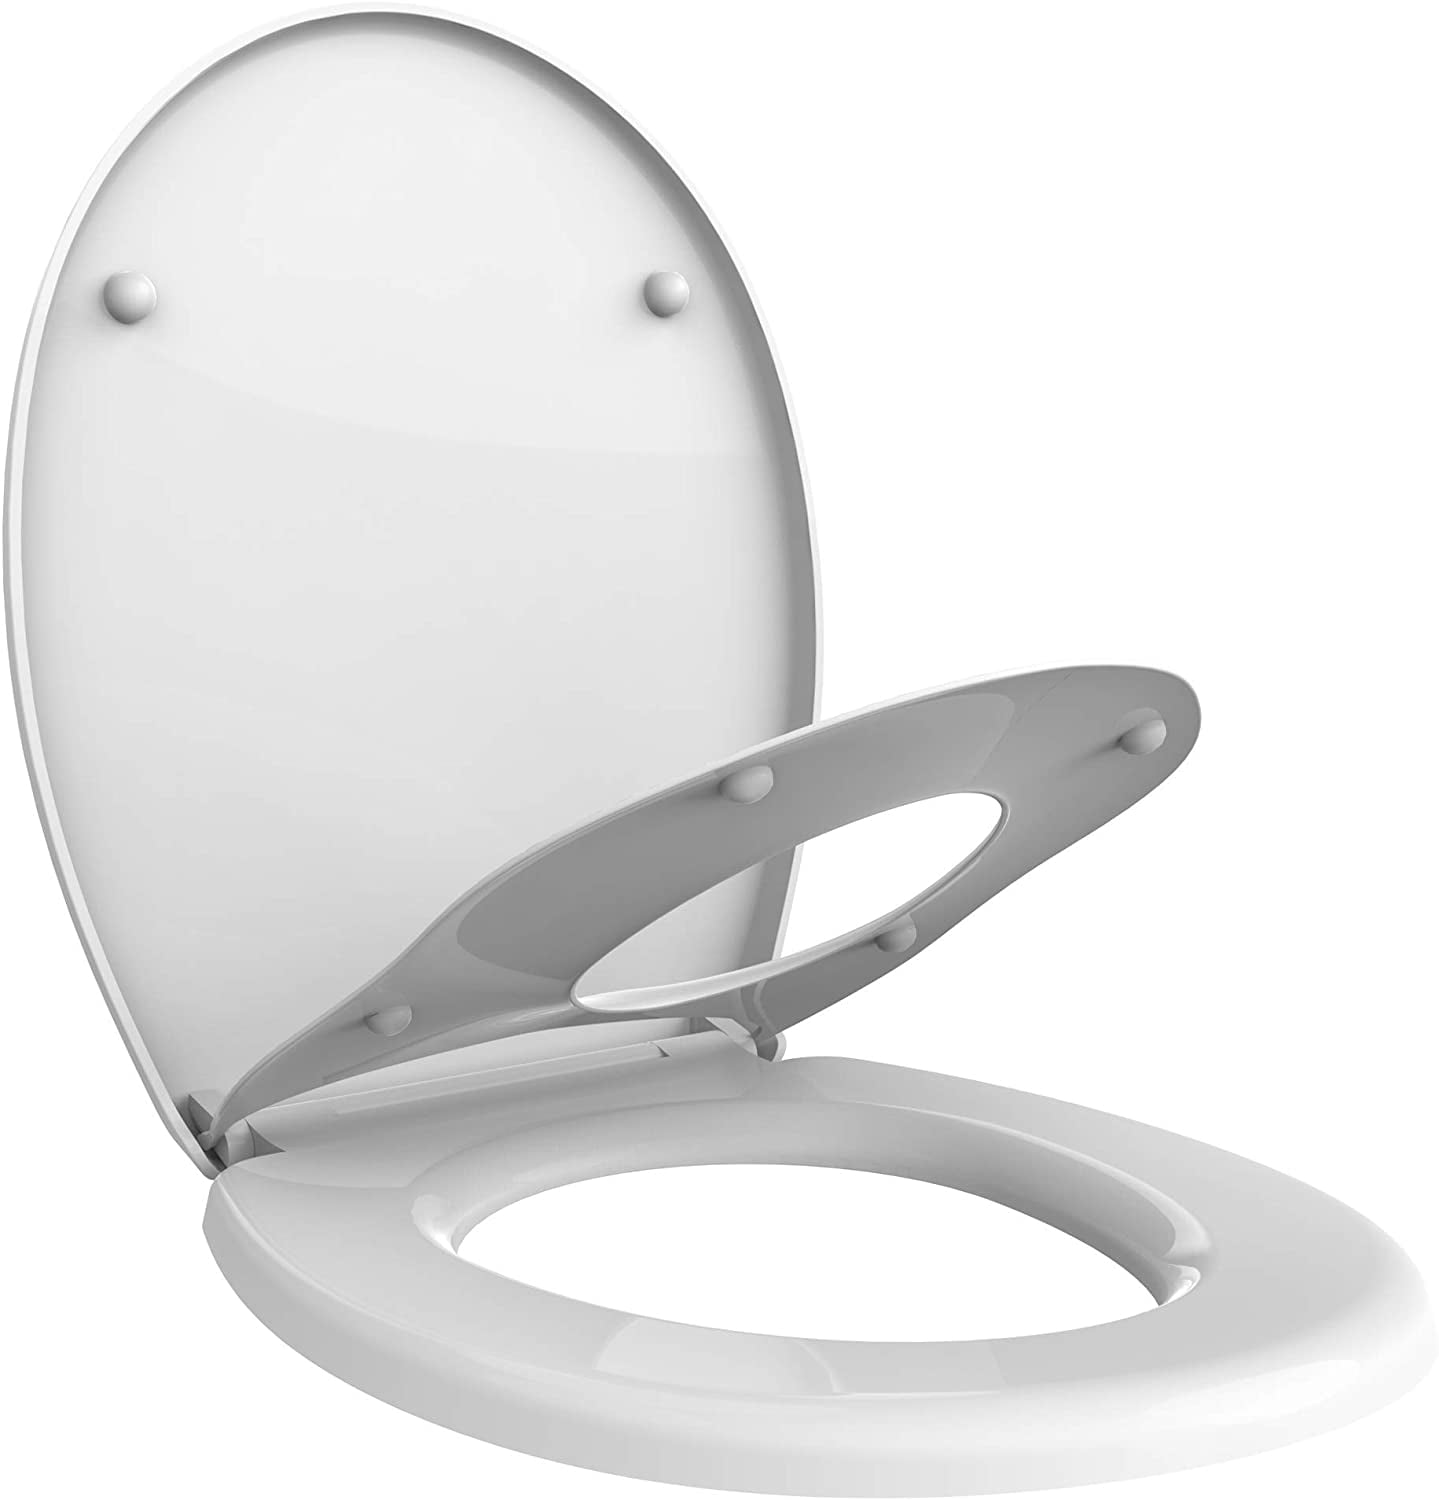 QUICK RELEASE SOFT CLOSE TOILET SEAT WHITE ROUND OVAL BATHROOM CHILD ADULT TRAIN 